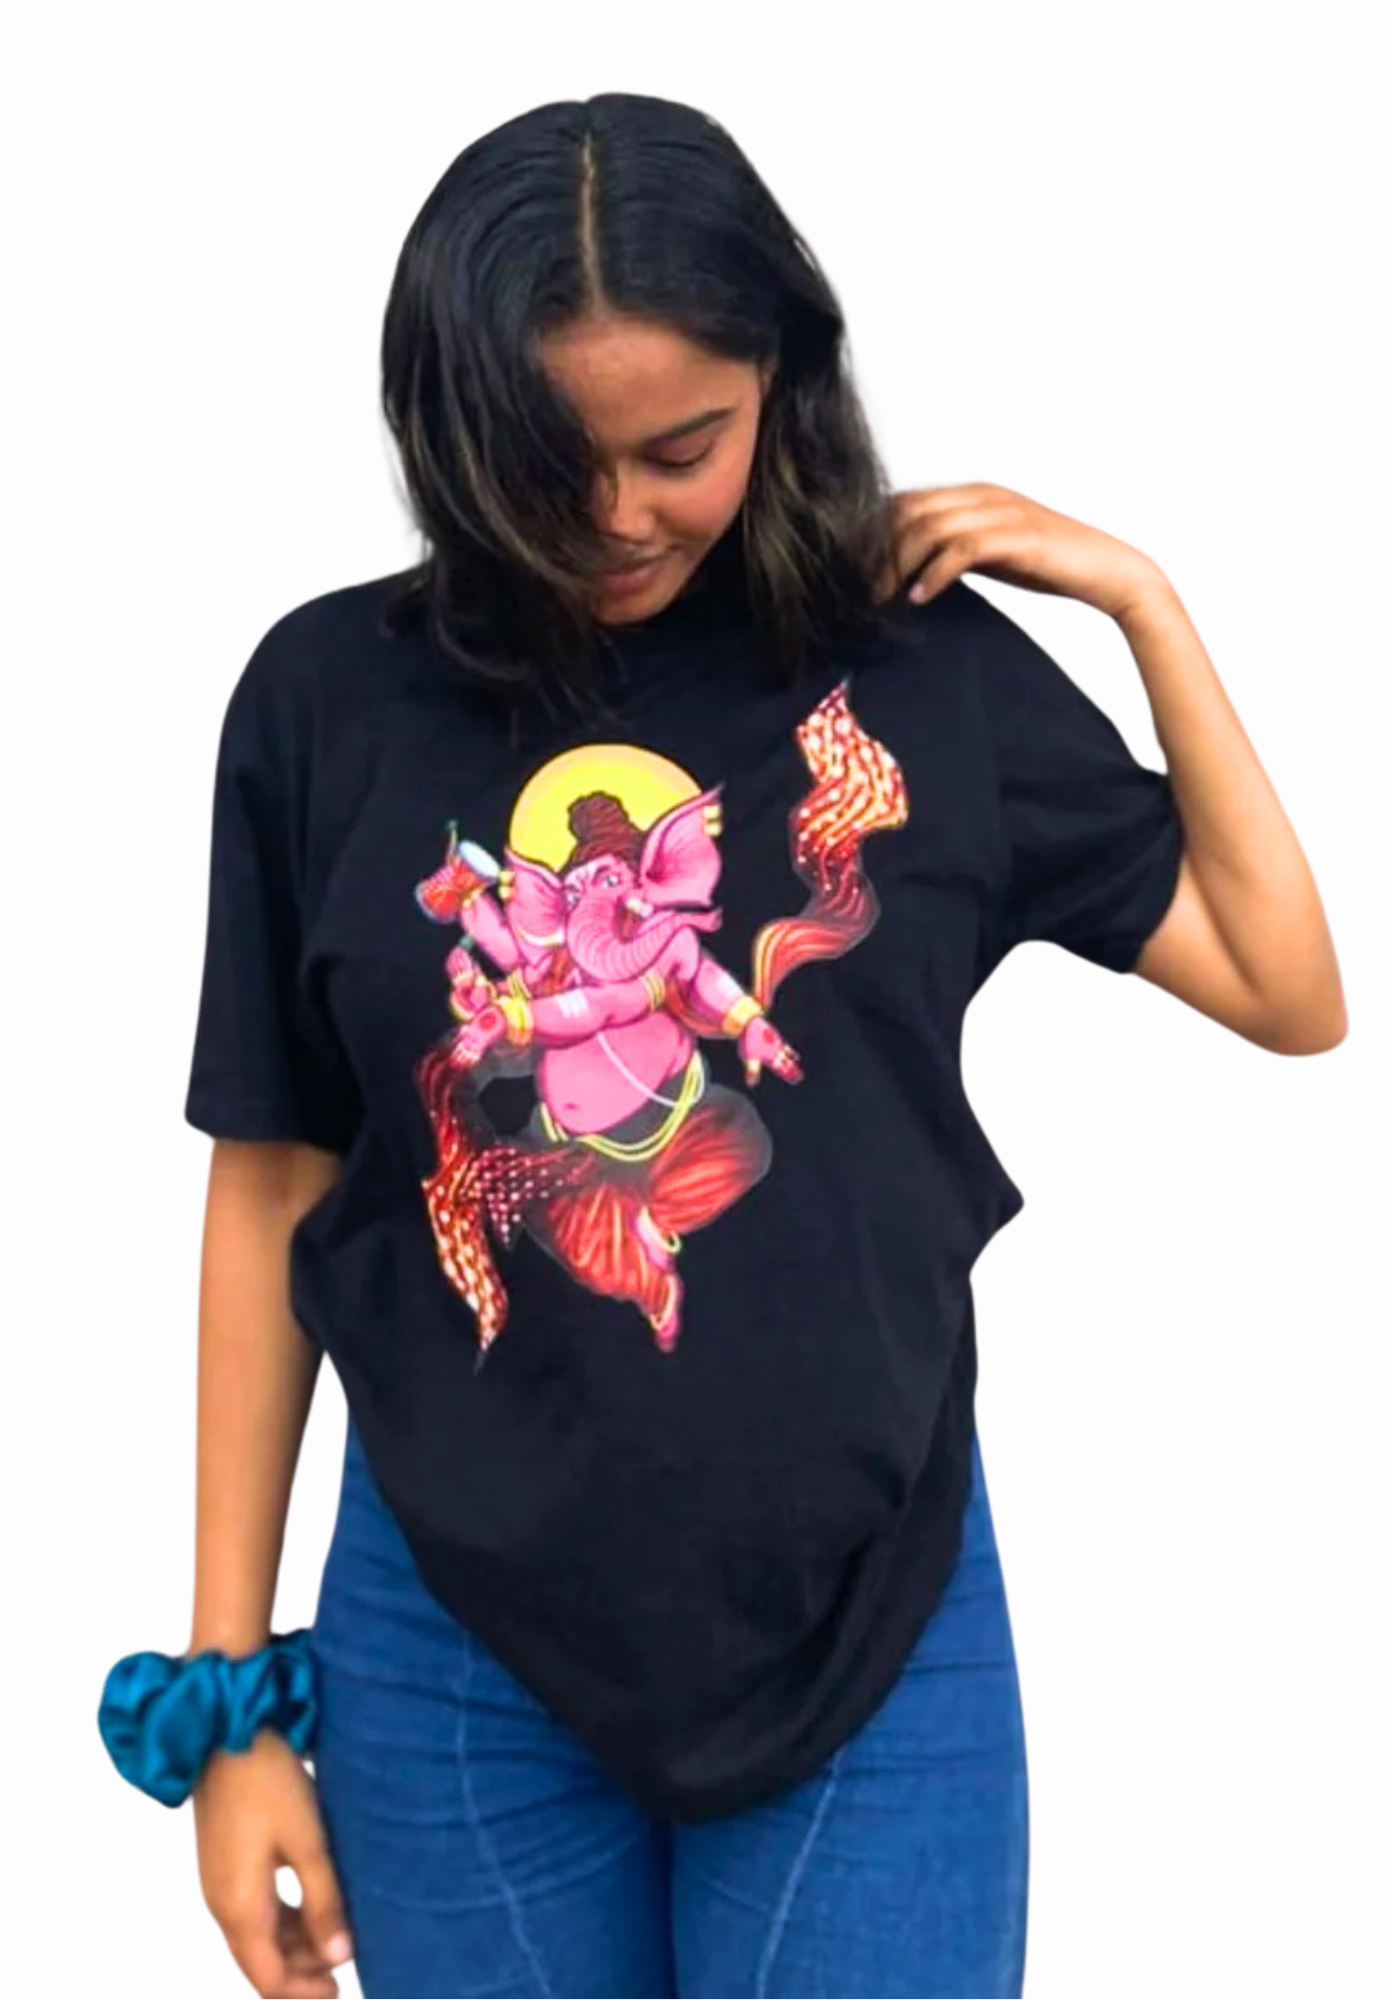 Remover of All Obstacles: Ganesh T-shirt